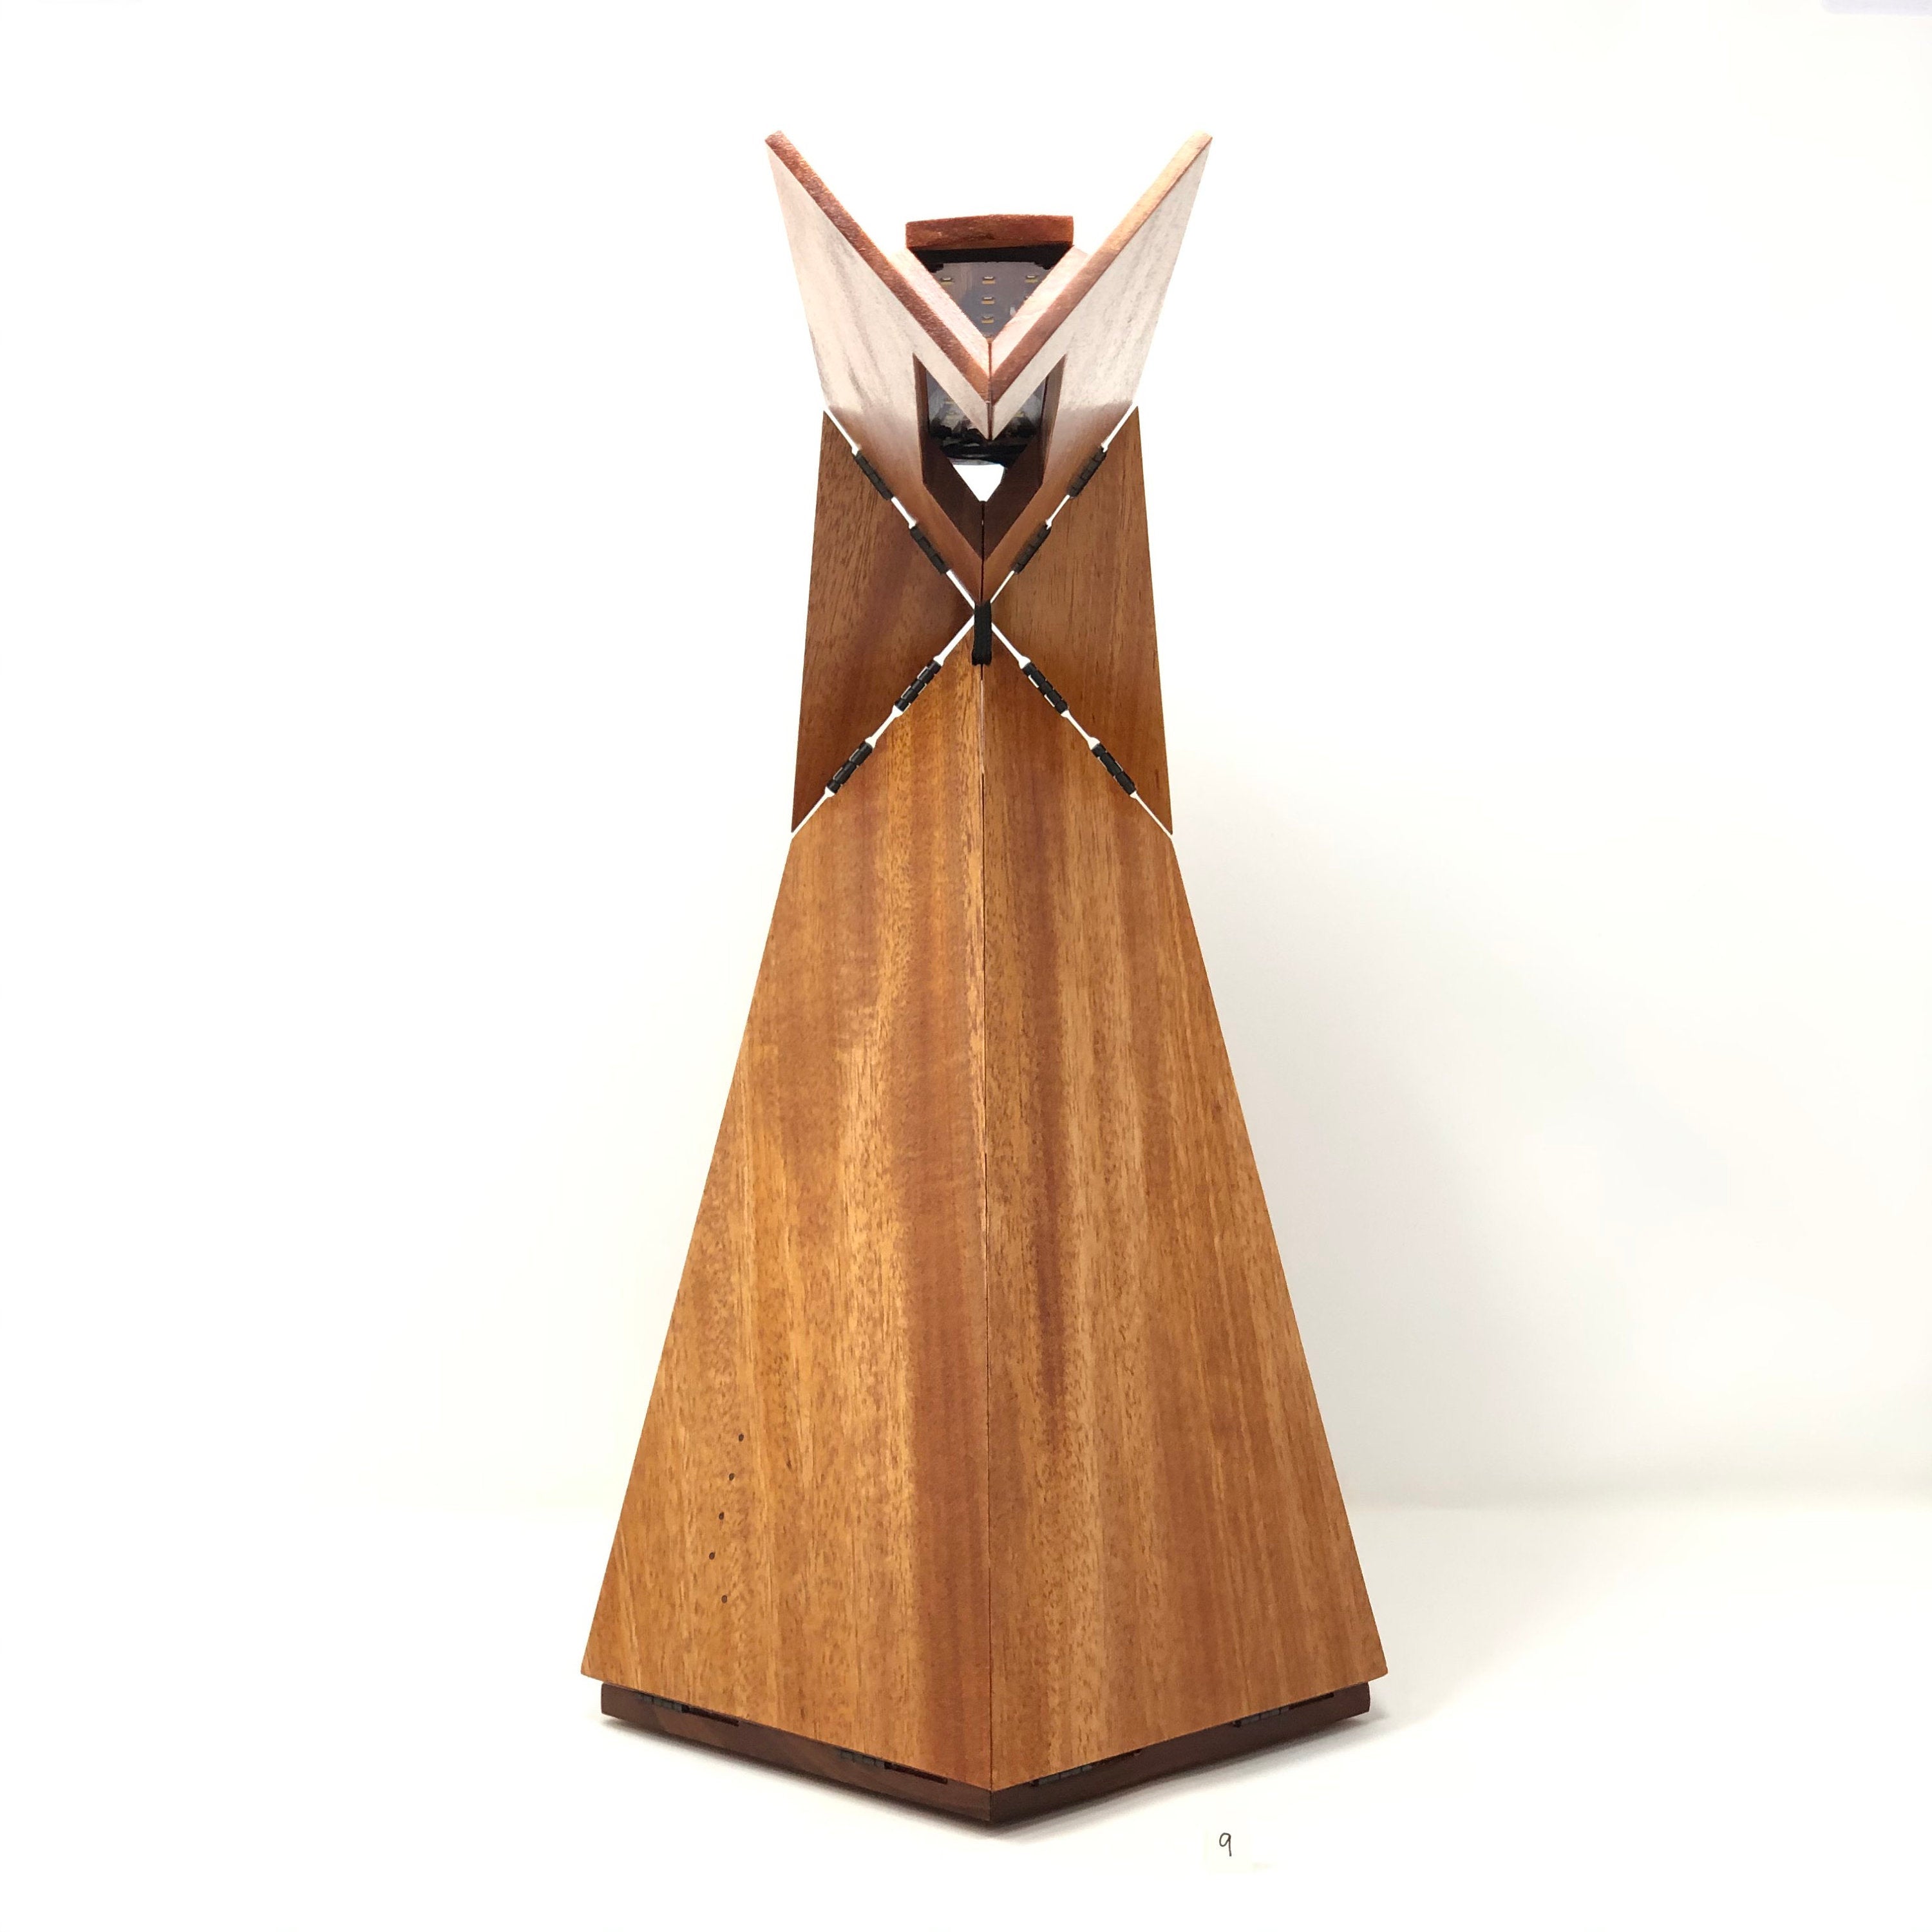 Kinetic Desk Lamp - First Limited Edition - Number 9 of 9 in Solid Sapele